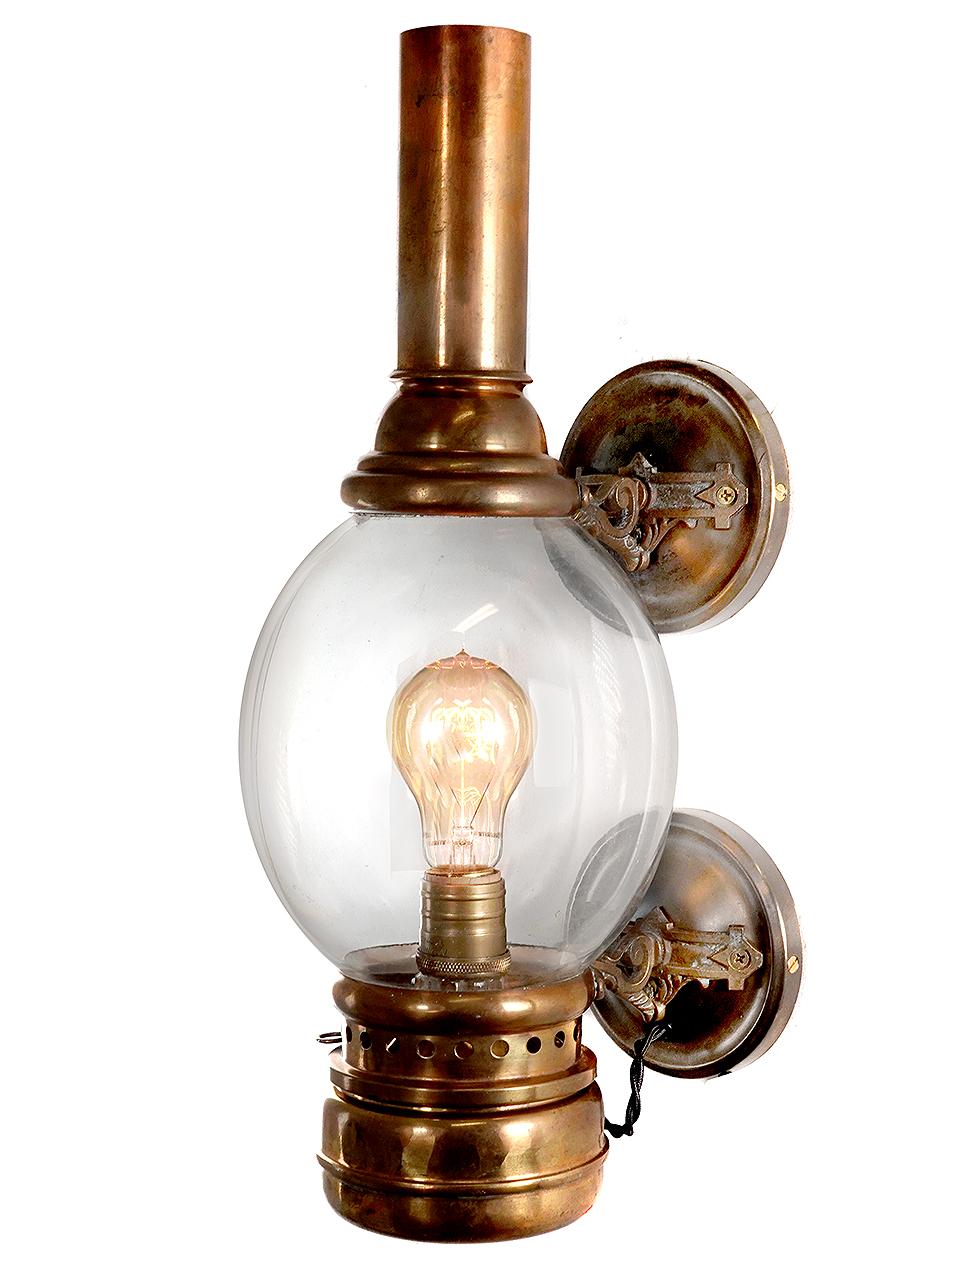 This is a classic egg globe railcar side lamp. We believe it dates to 1880 and was manufactured by Adams and Westlake. It was oil and is now wired to take a standard bulb. This is one of the rare early decorative train car lamps from our collection.